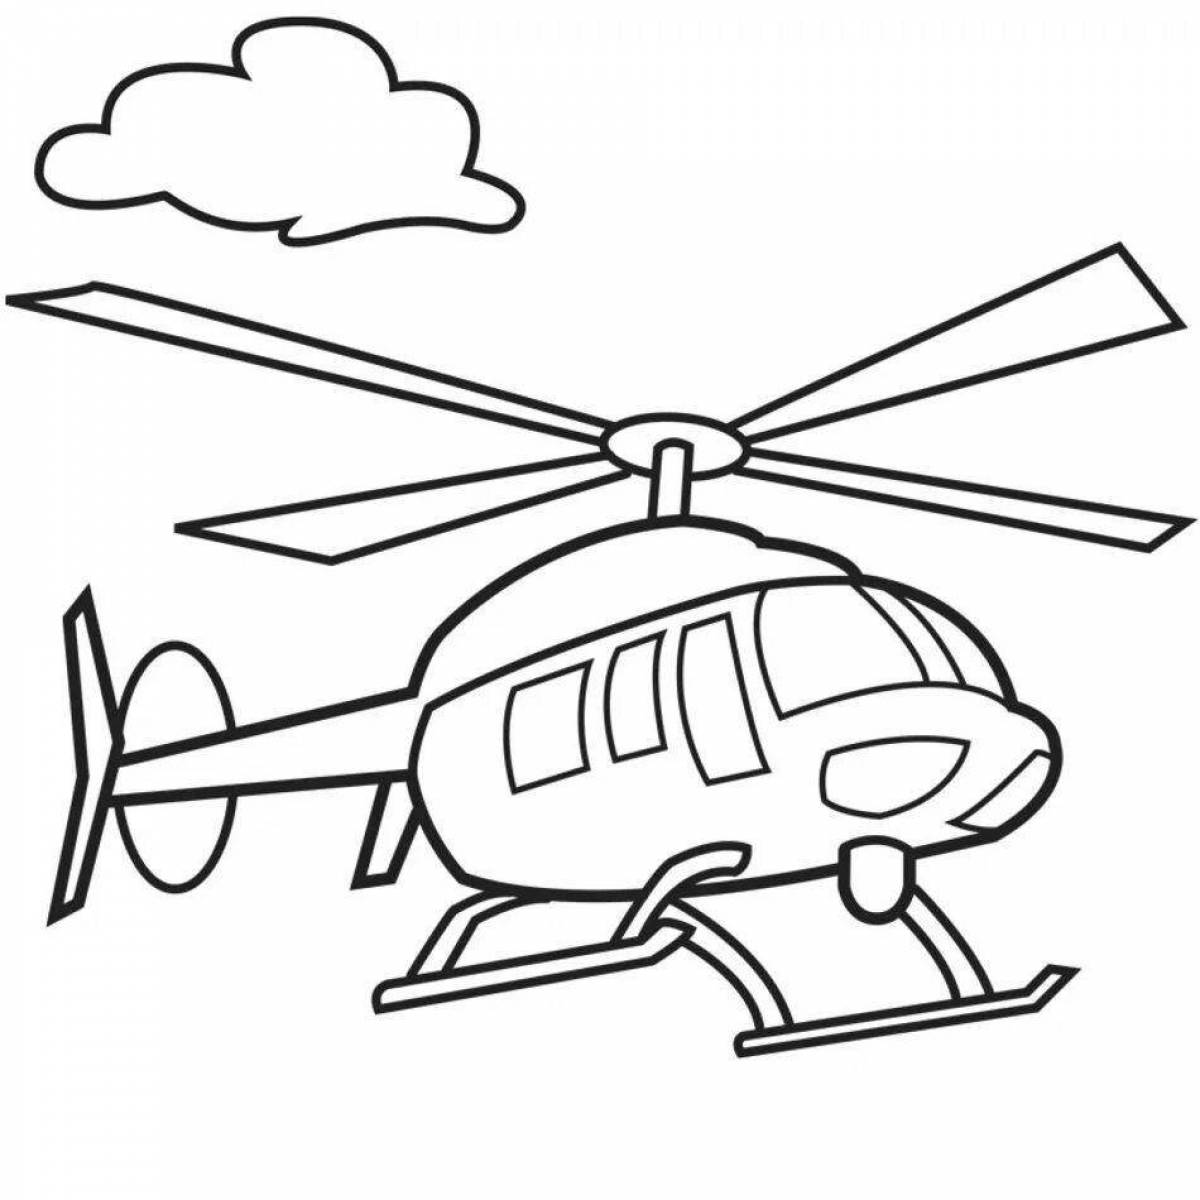 Helicopter coloring book for kids